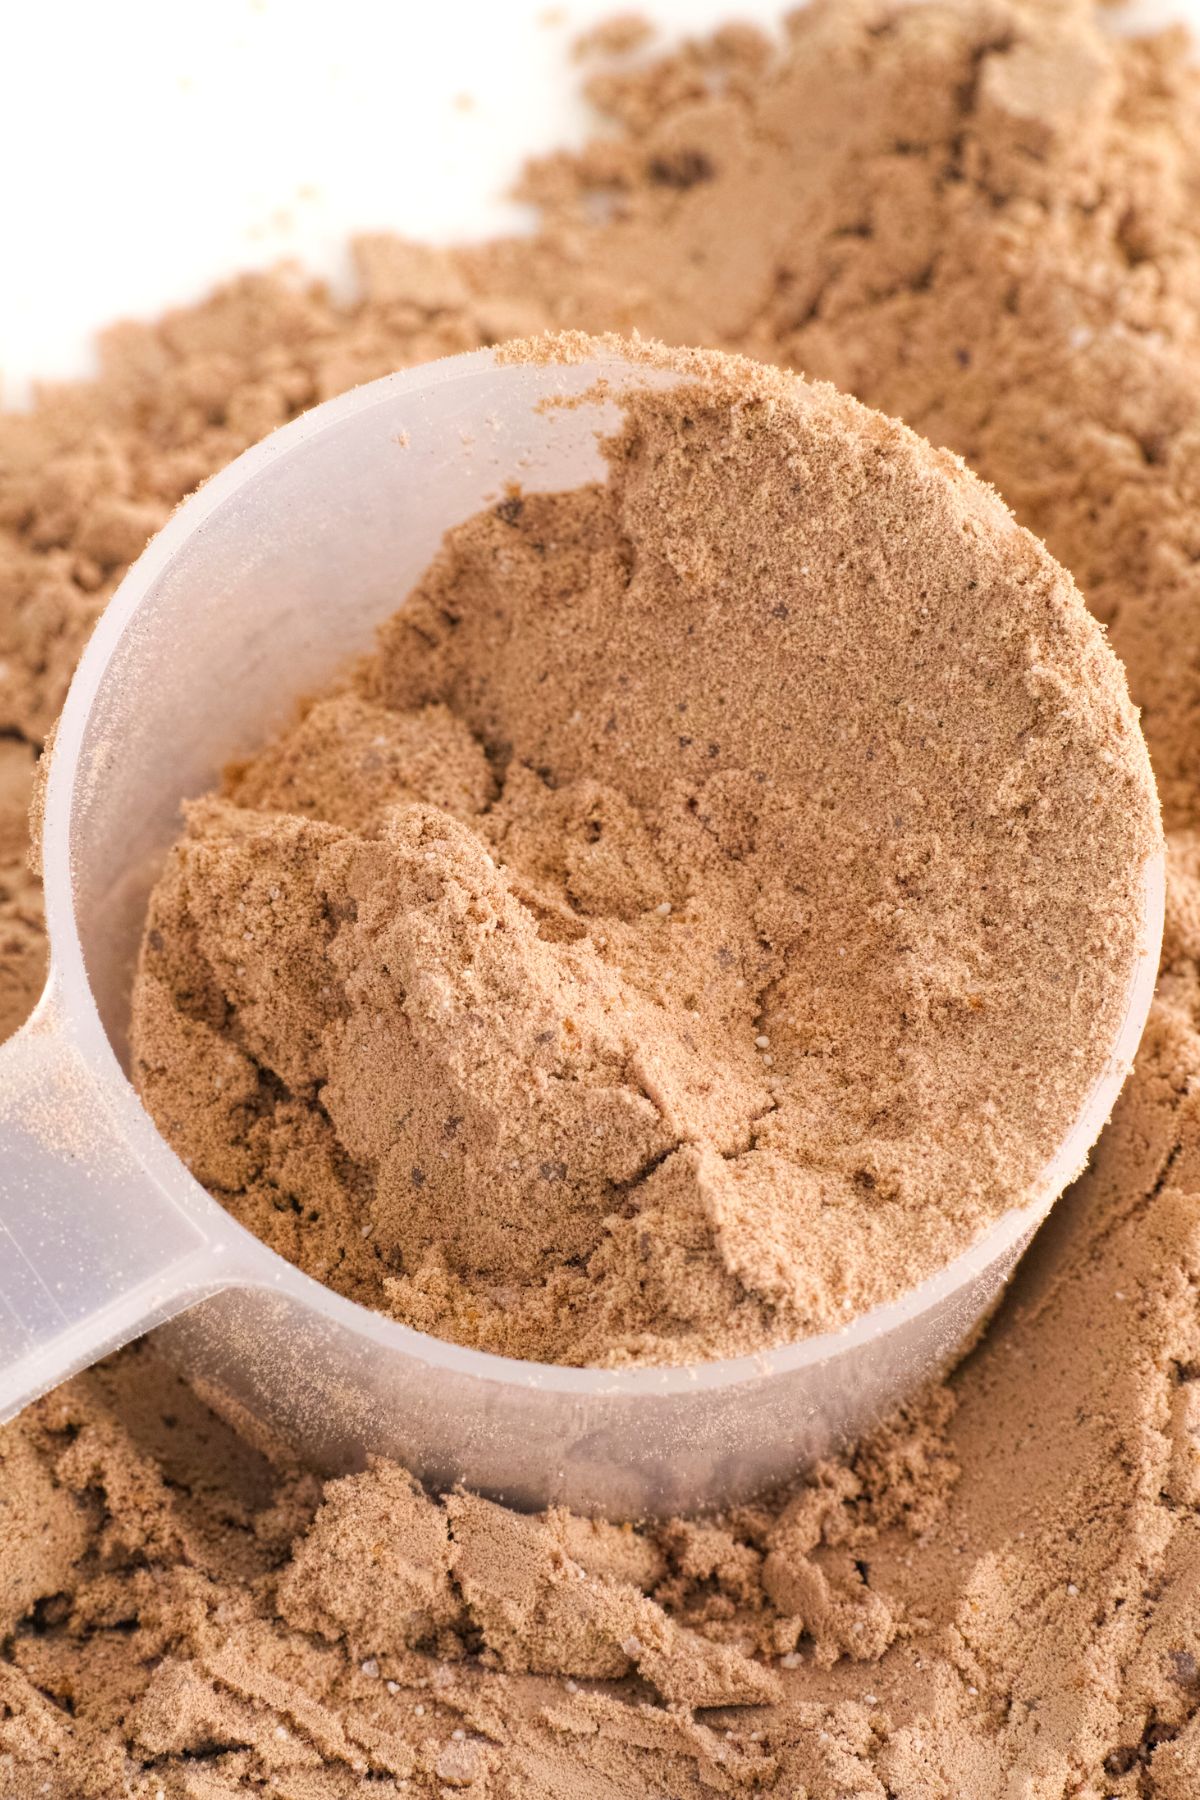 a scoop of soy protein isolate.